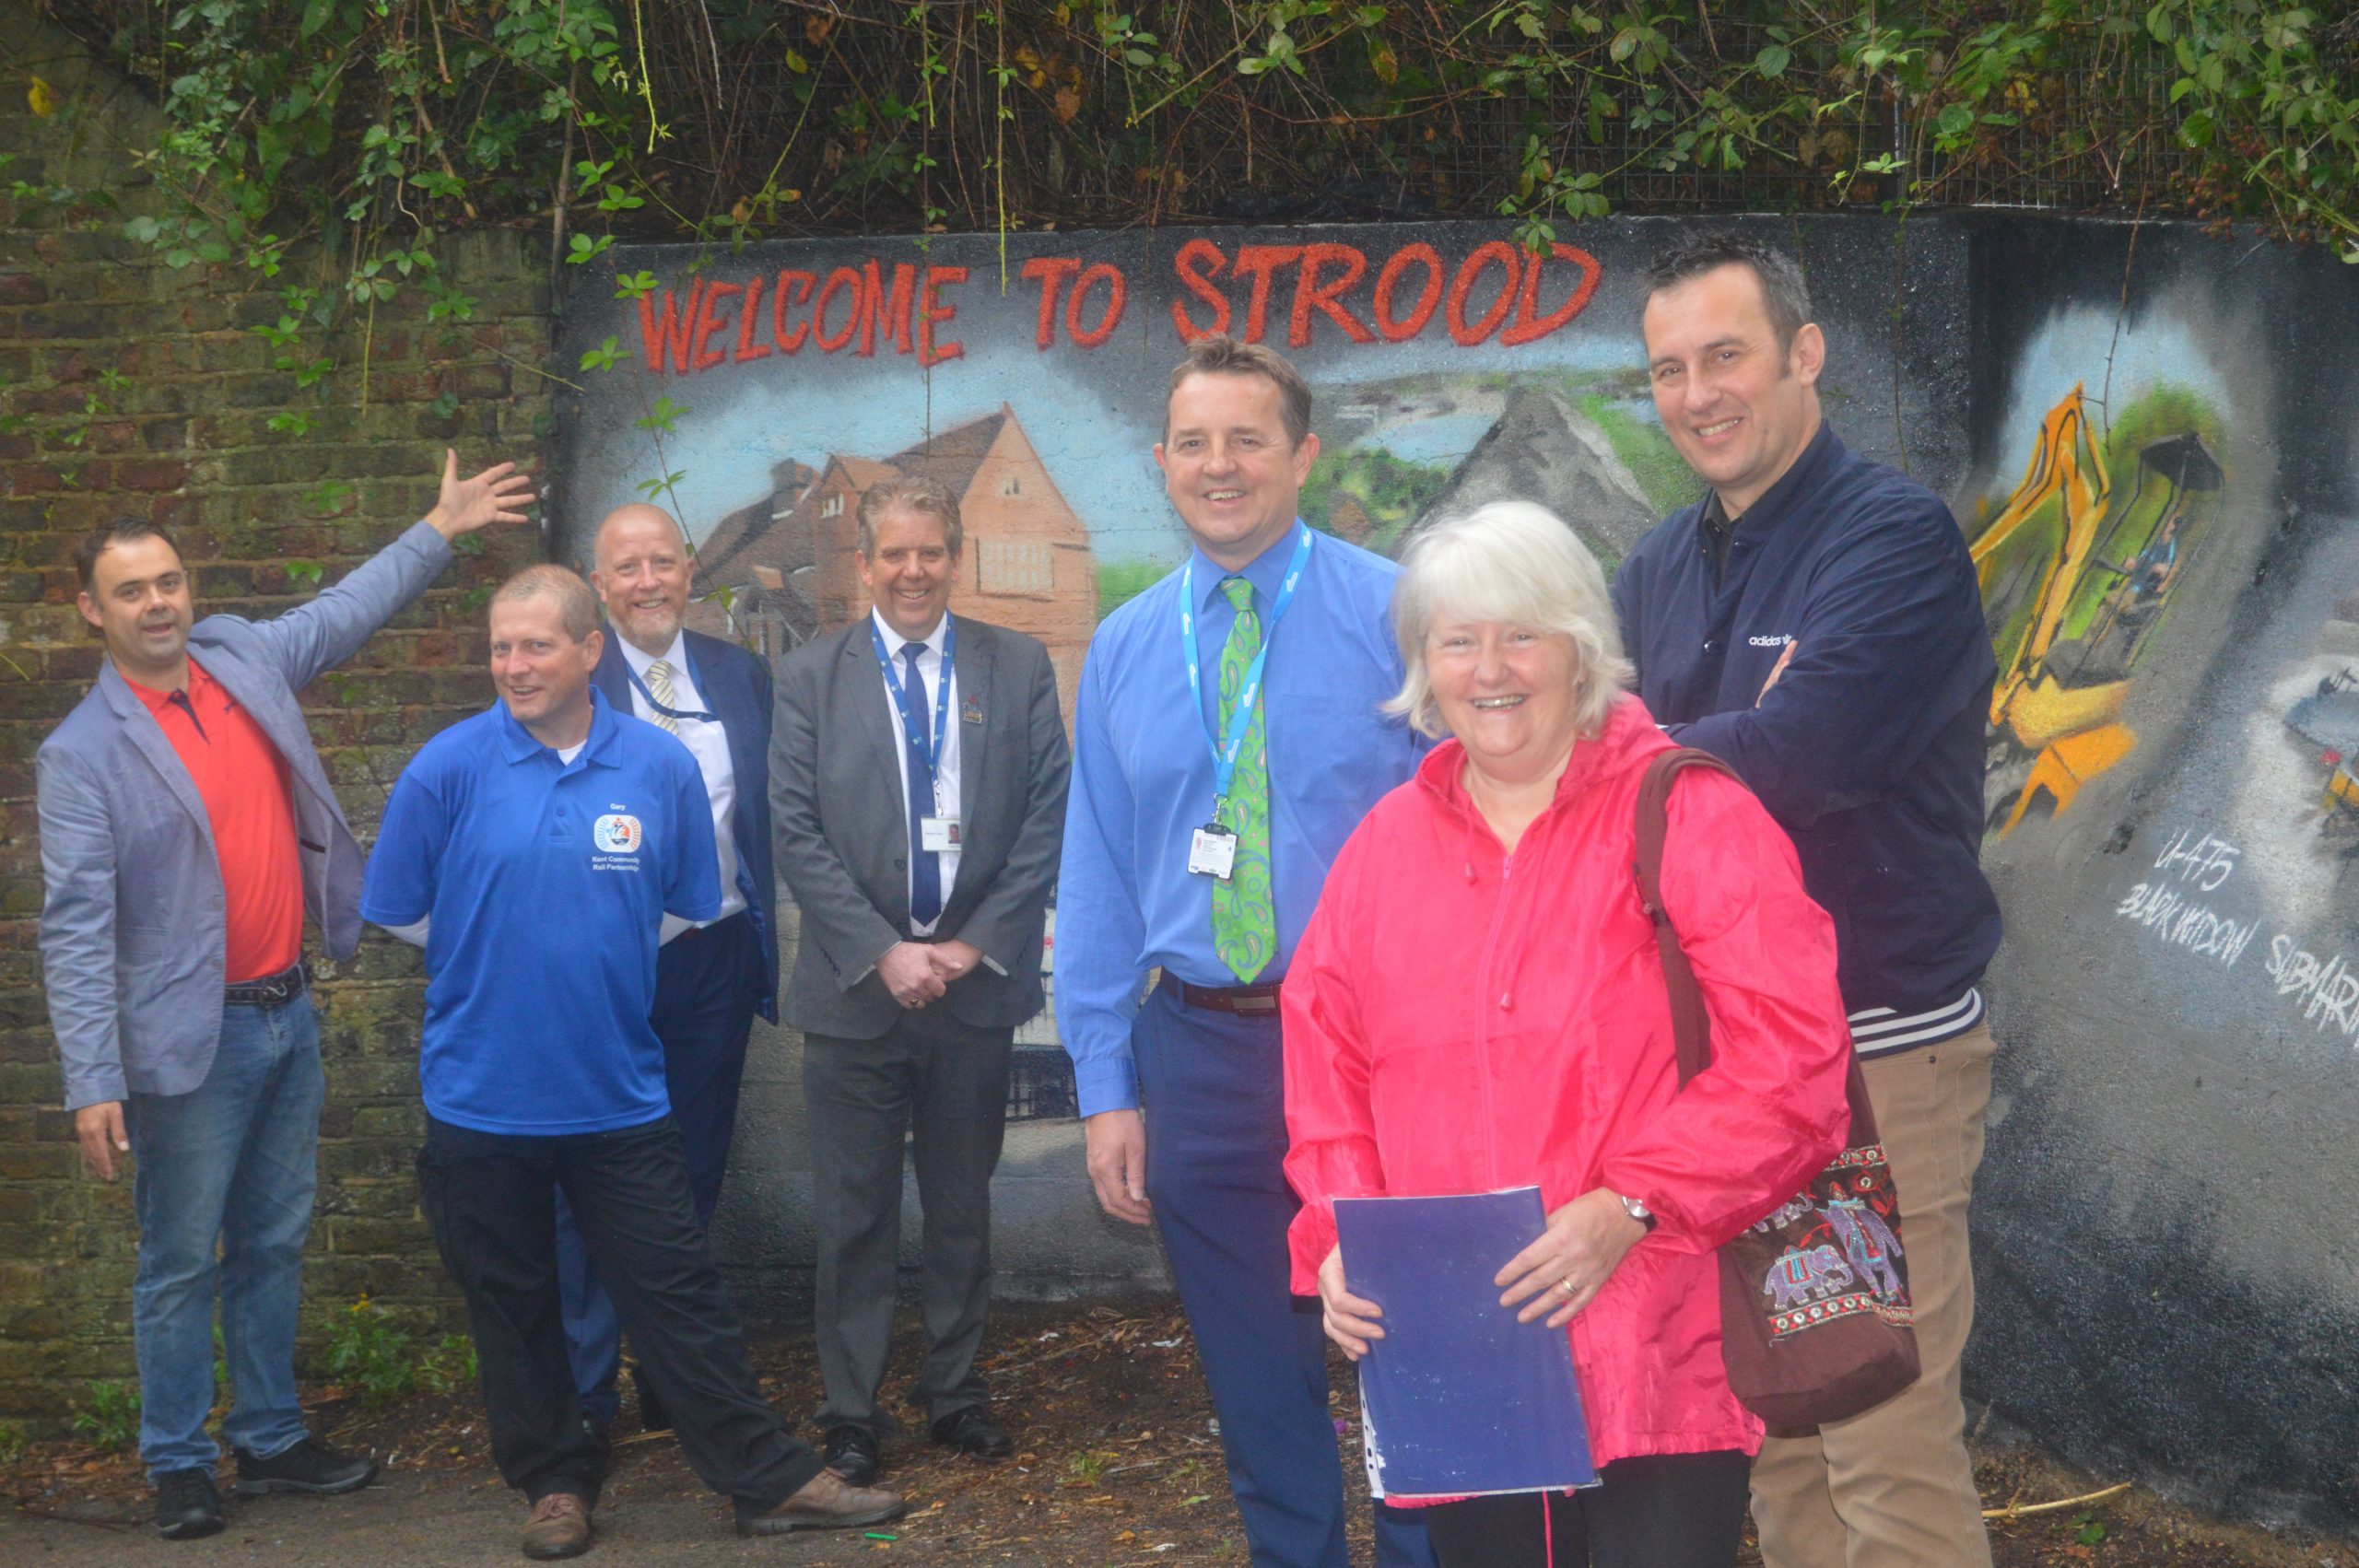 Members gathered in front of a community mural at Strood station.